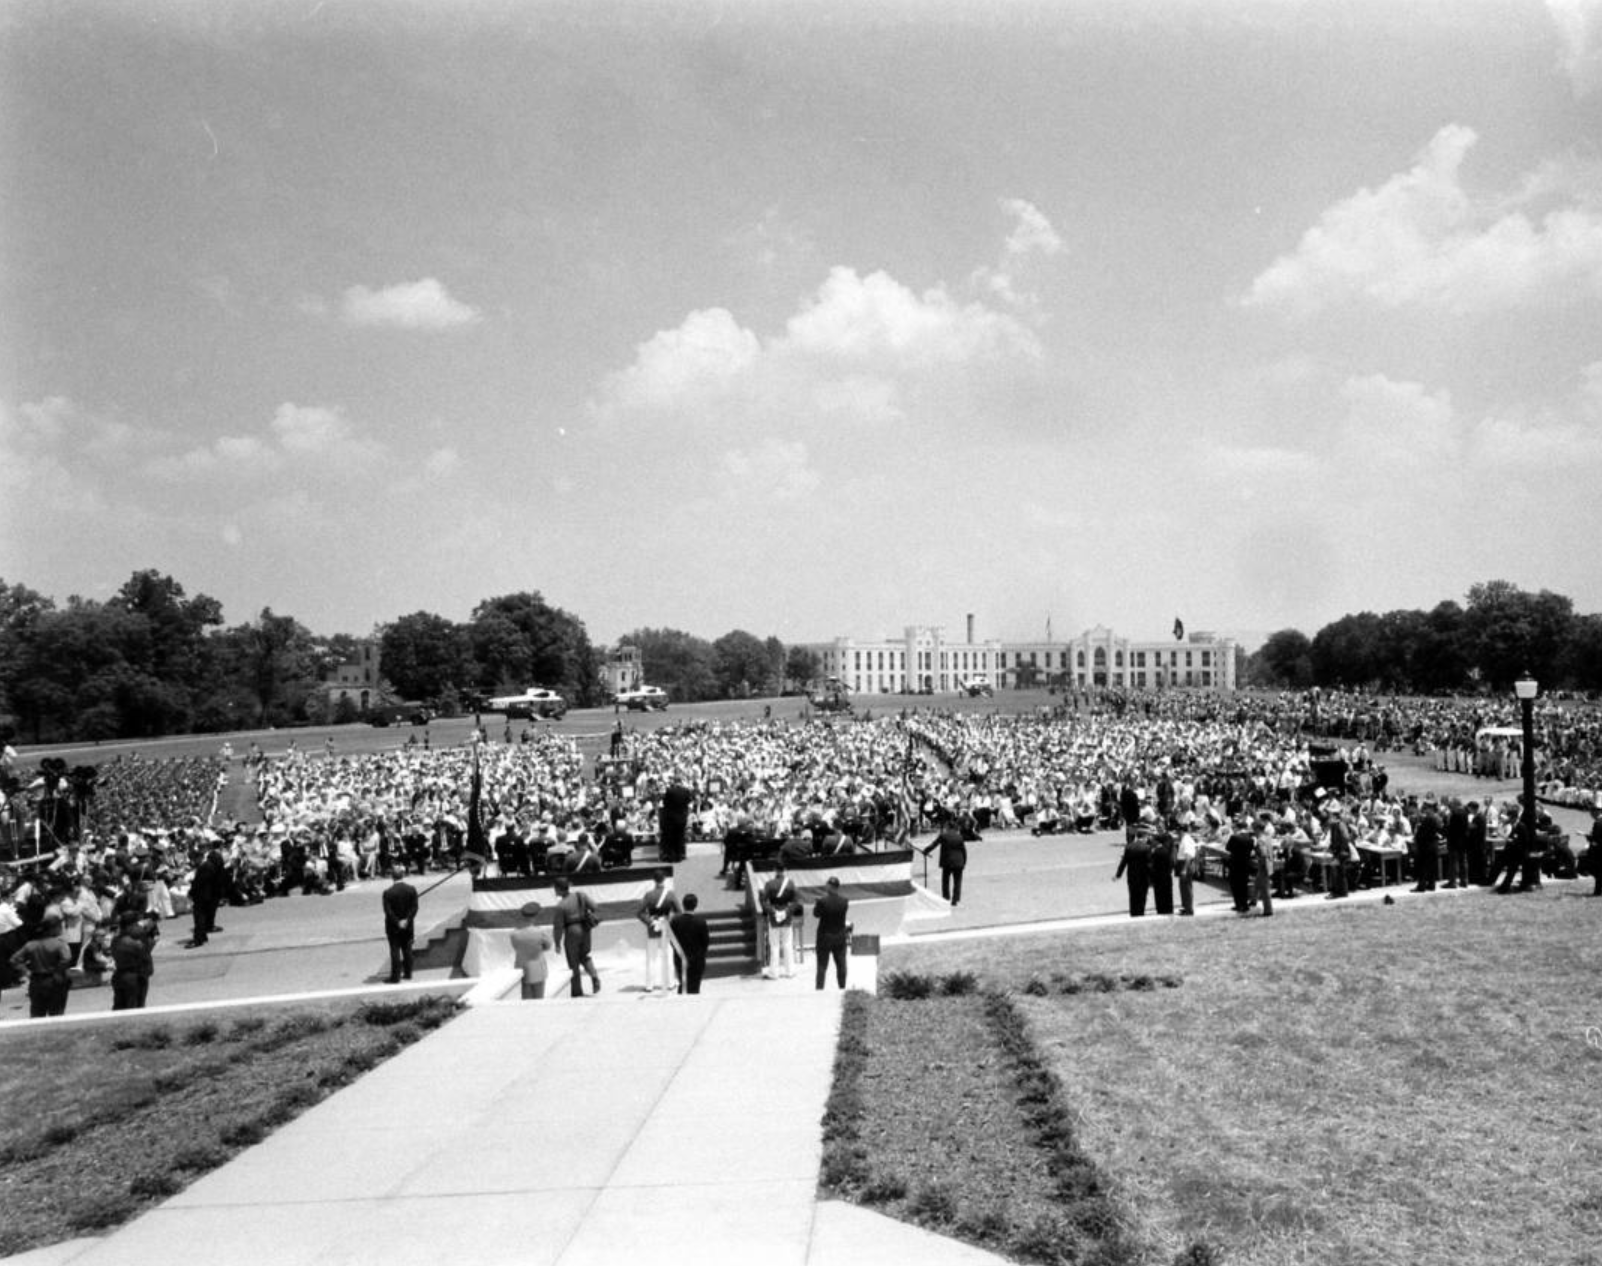 View of the Parade ground from the George C. Marshall Research Library.